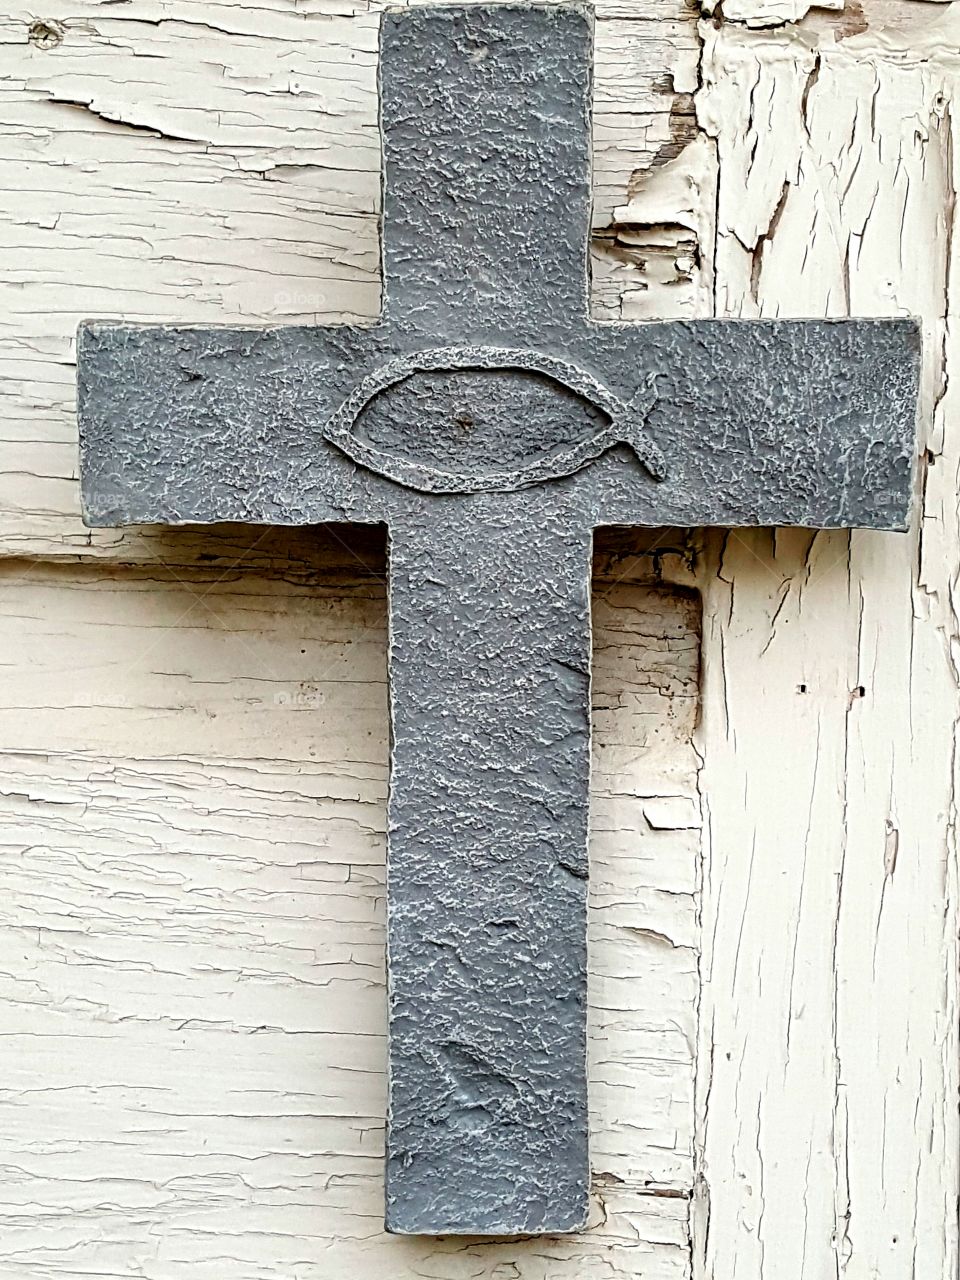 I can't remember exactly when we got this cross, but it's been hanging by our door for years.